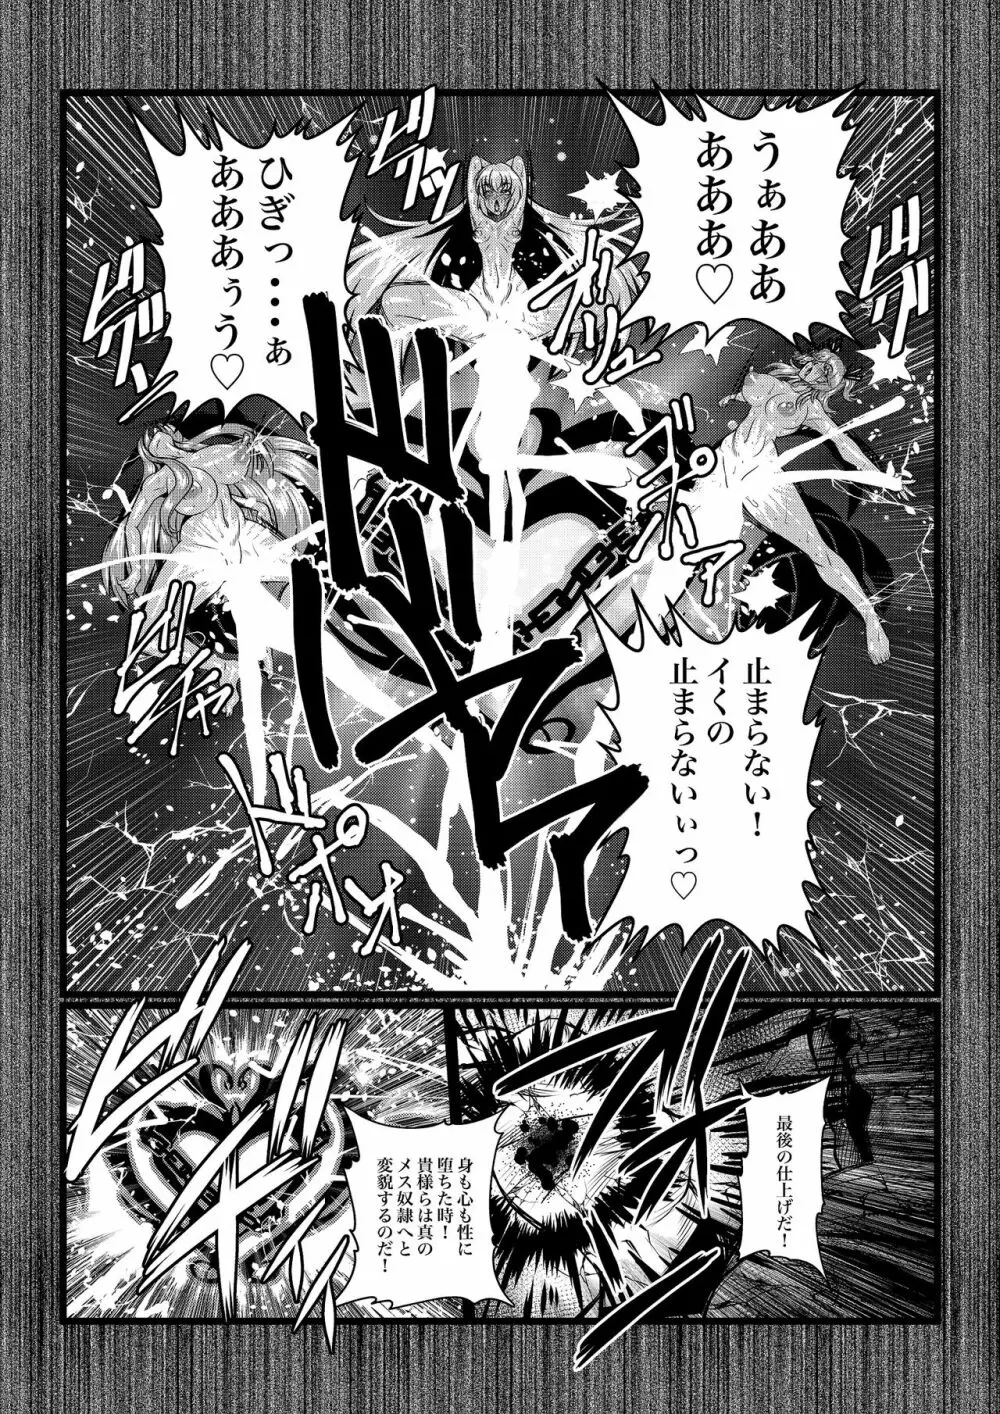 Tales Of DarkSide〜三散華〜 - page21